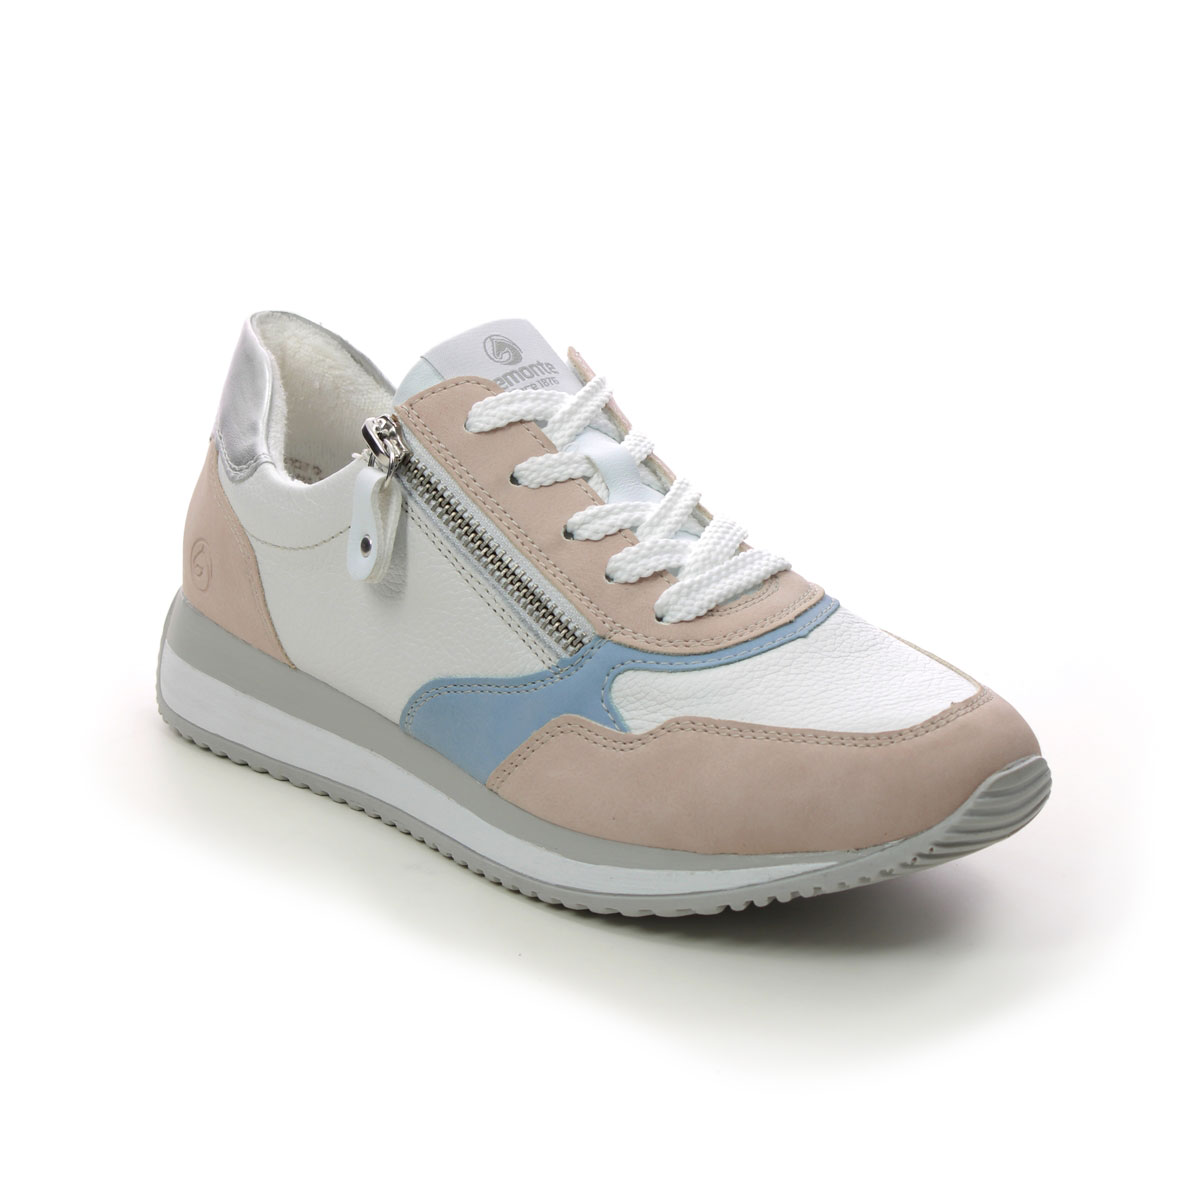 Remonte D0H01-80 Vapod Zip White Blue Pink Womens trainers in a Plain Leather and Man-made in Size 40